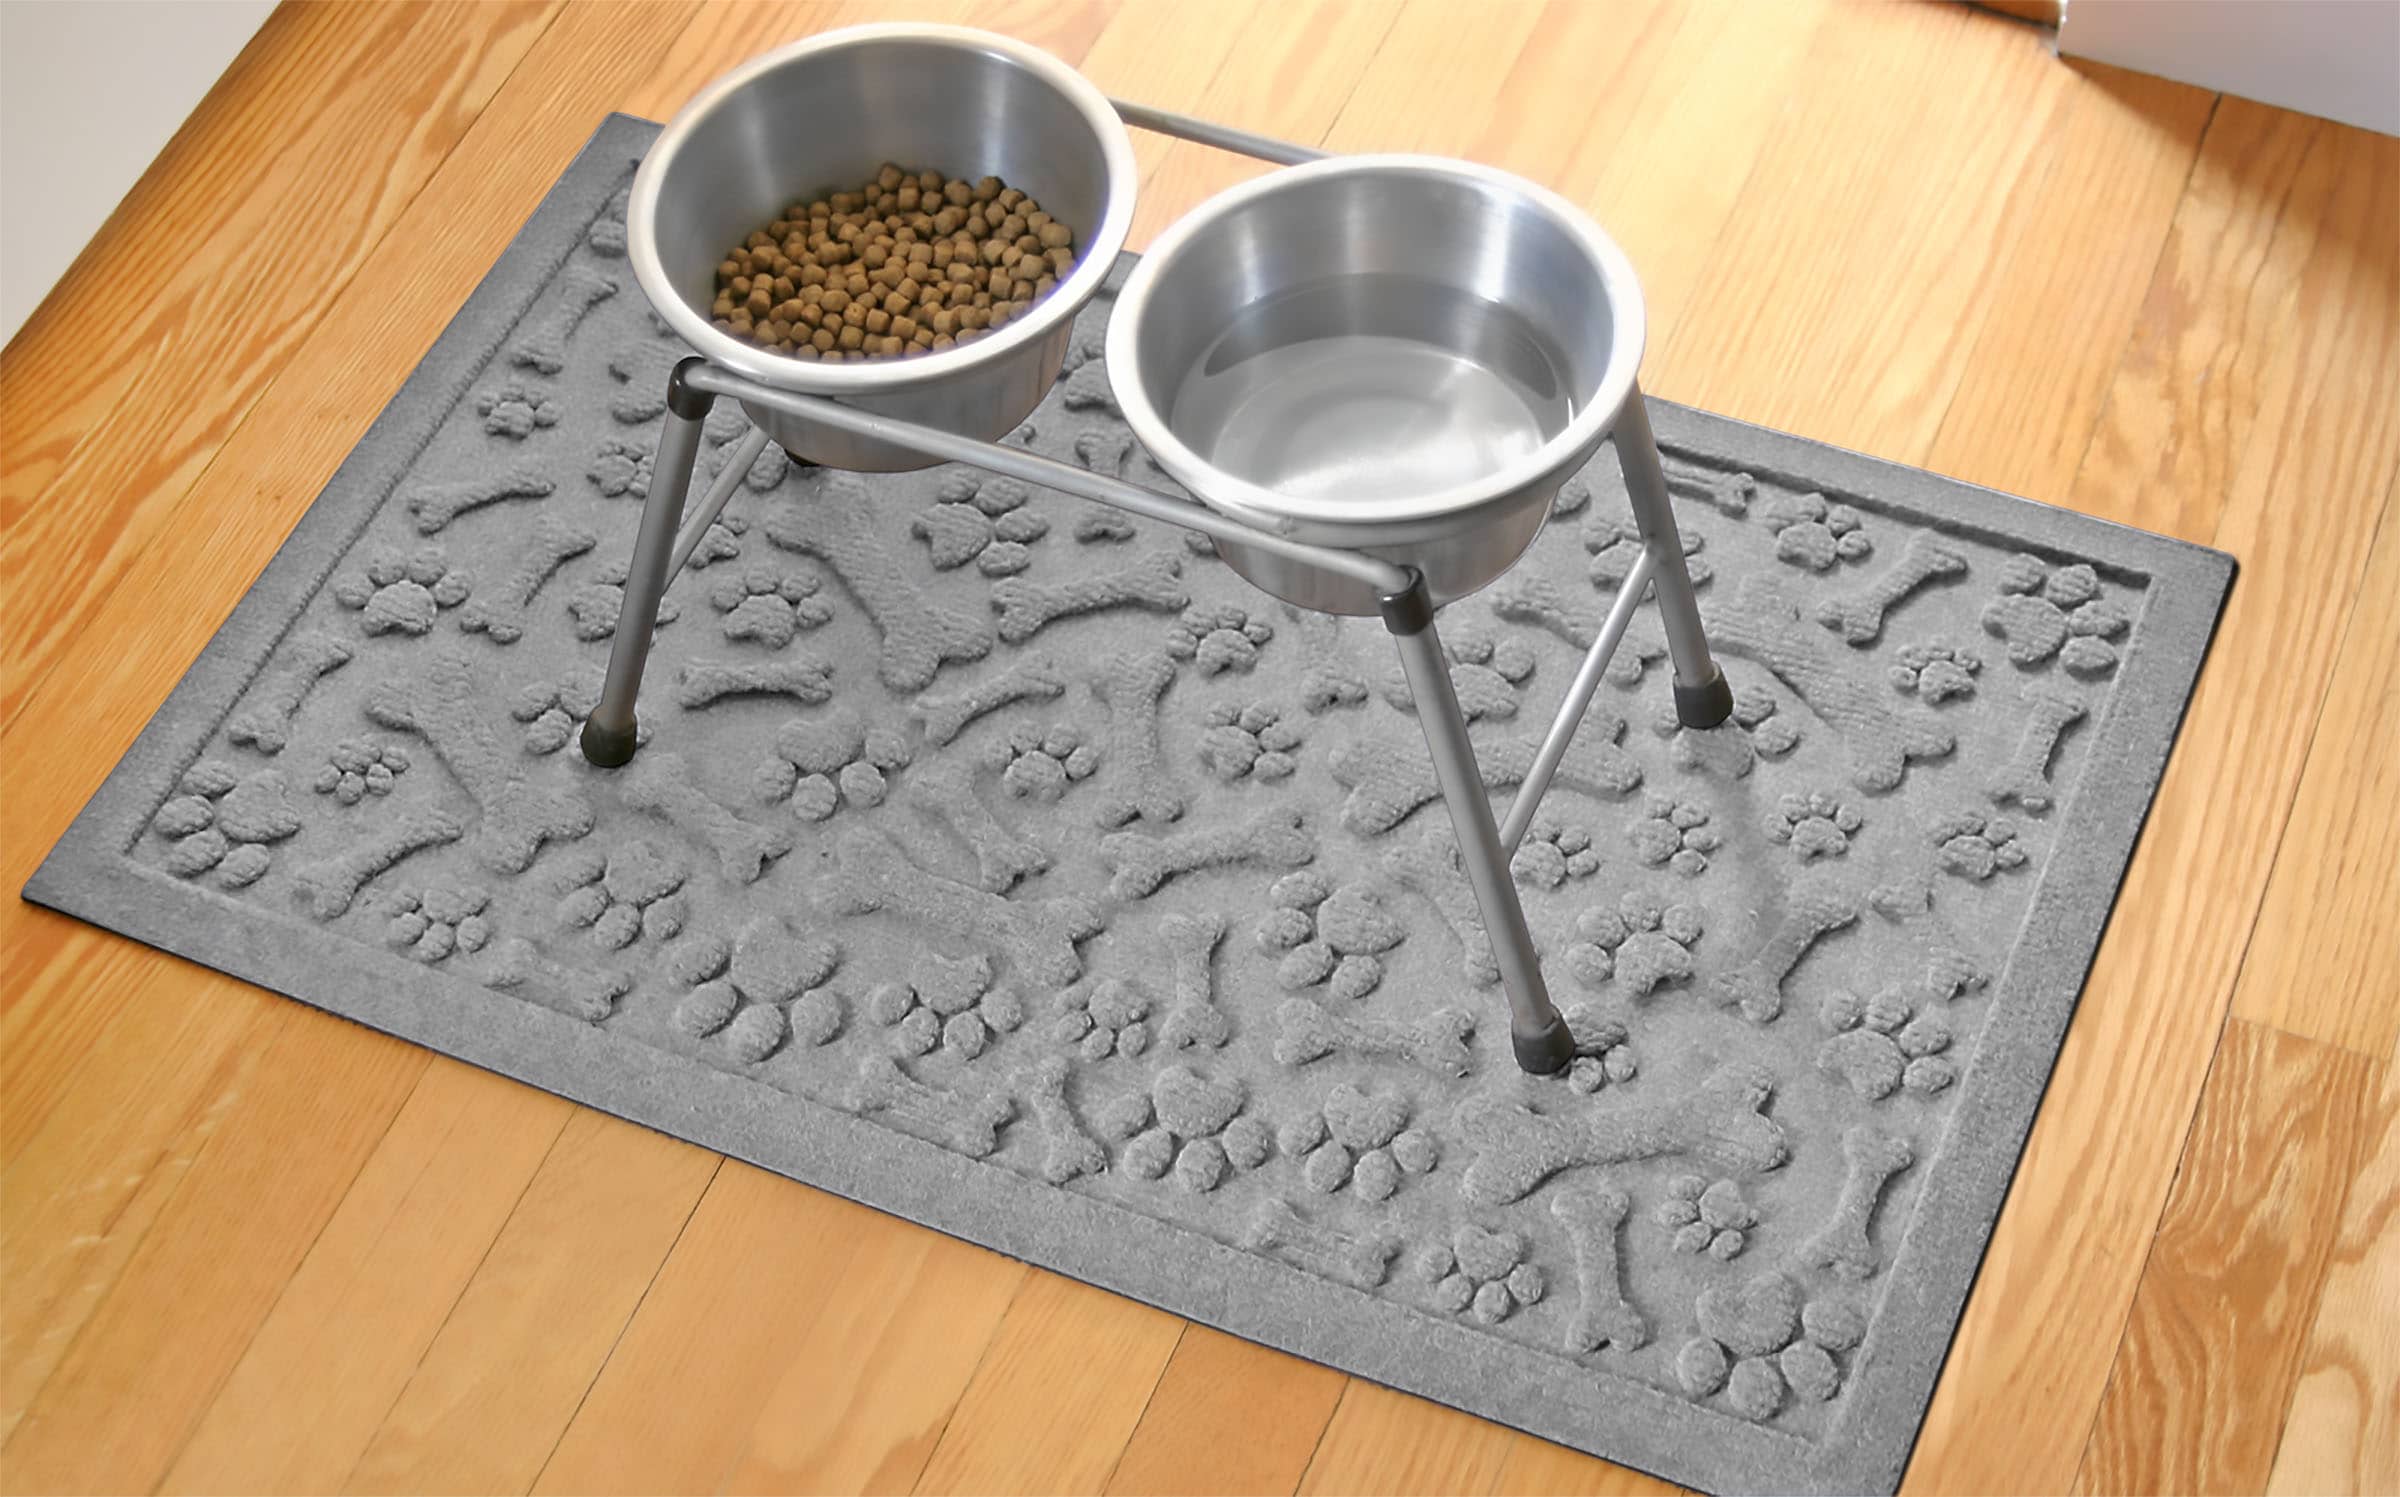 Dog Food Mat - Non-skid Placemat with Raised Edge for Dog or Cat